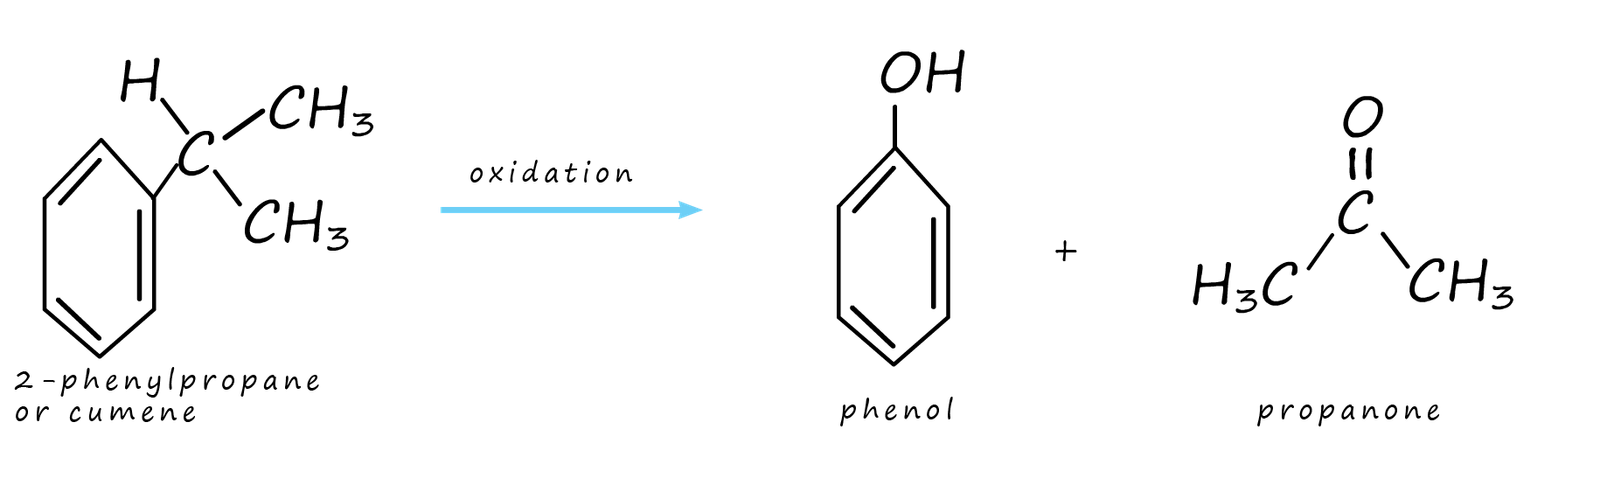 oxidation of cumene to form phenol and propanone